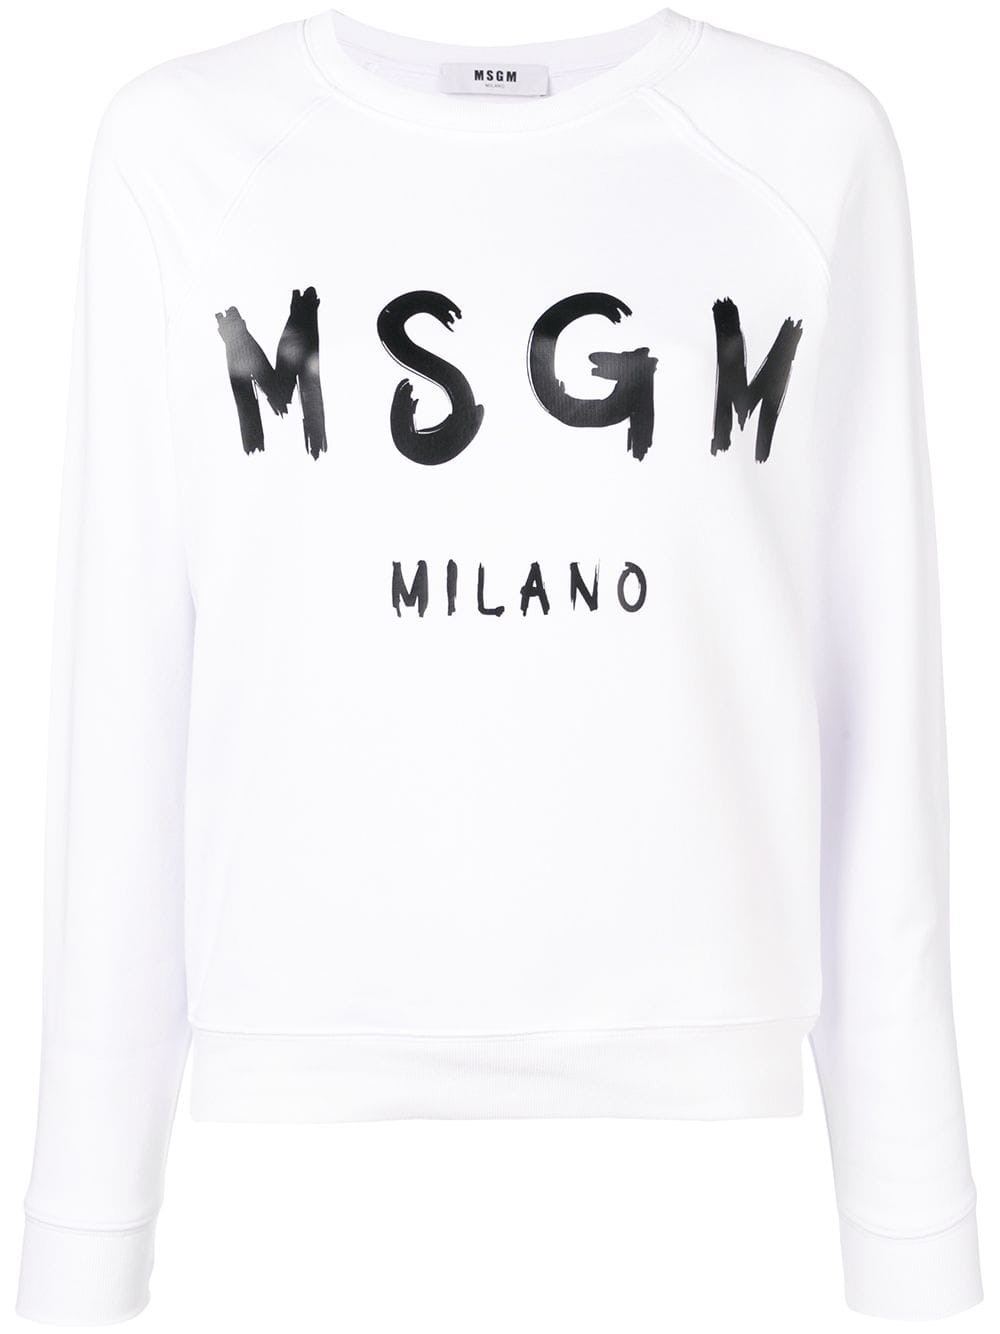 msgm LOGO LONG SLEEVE T-SHIRT available on montiboutique.com - 26589